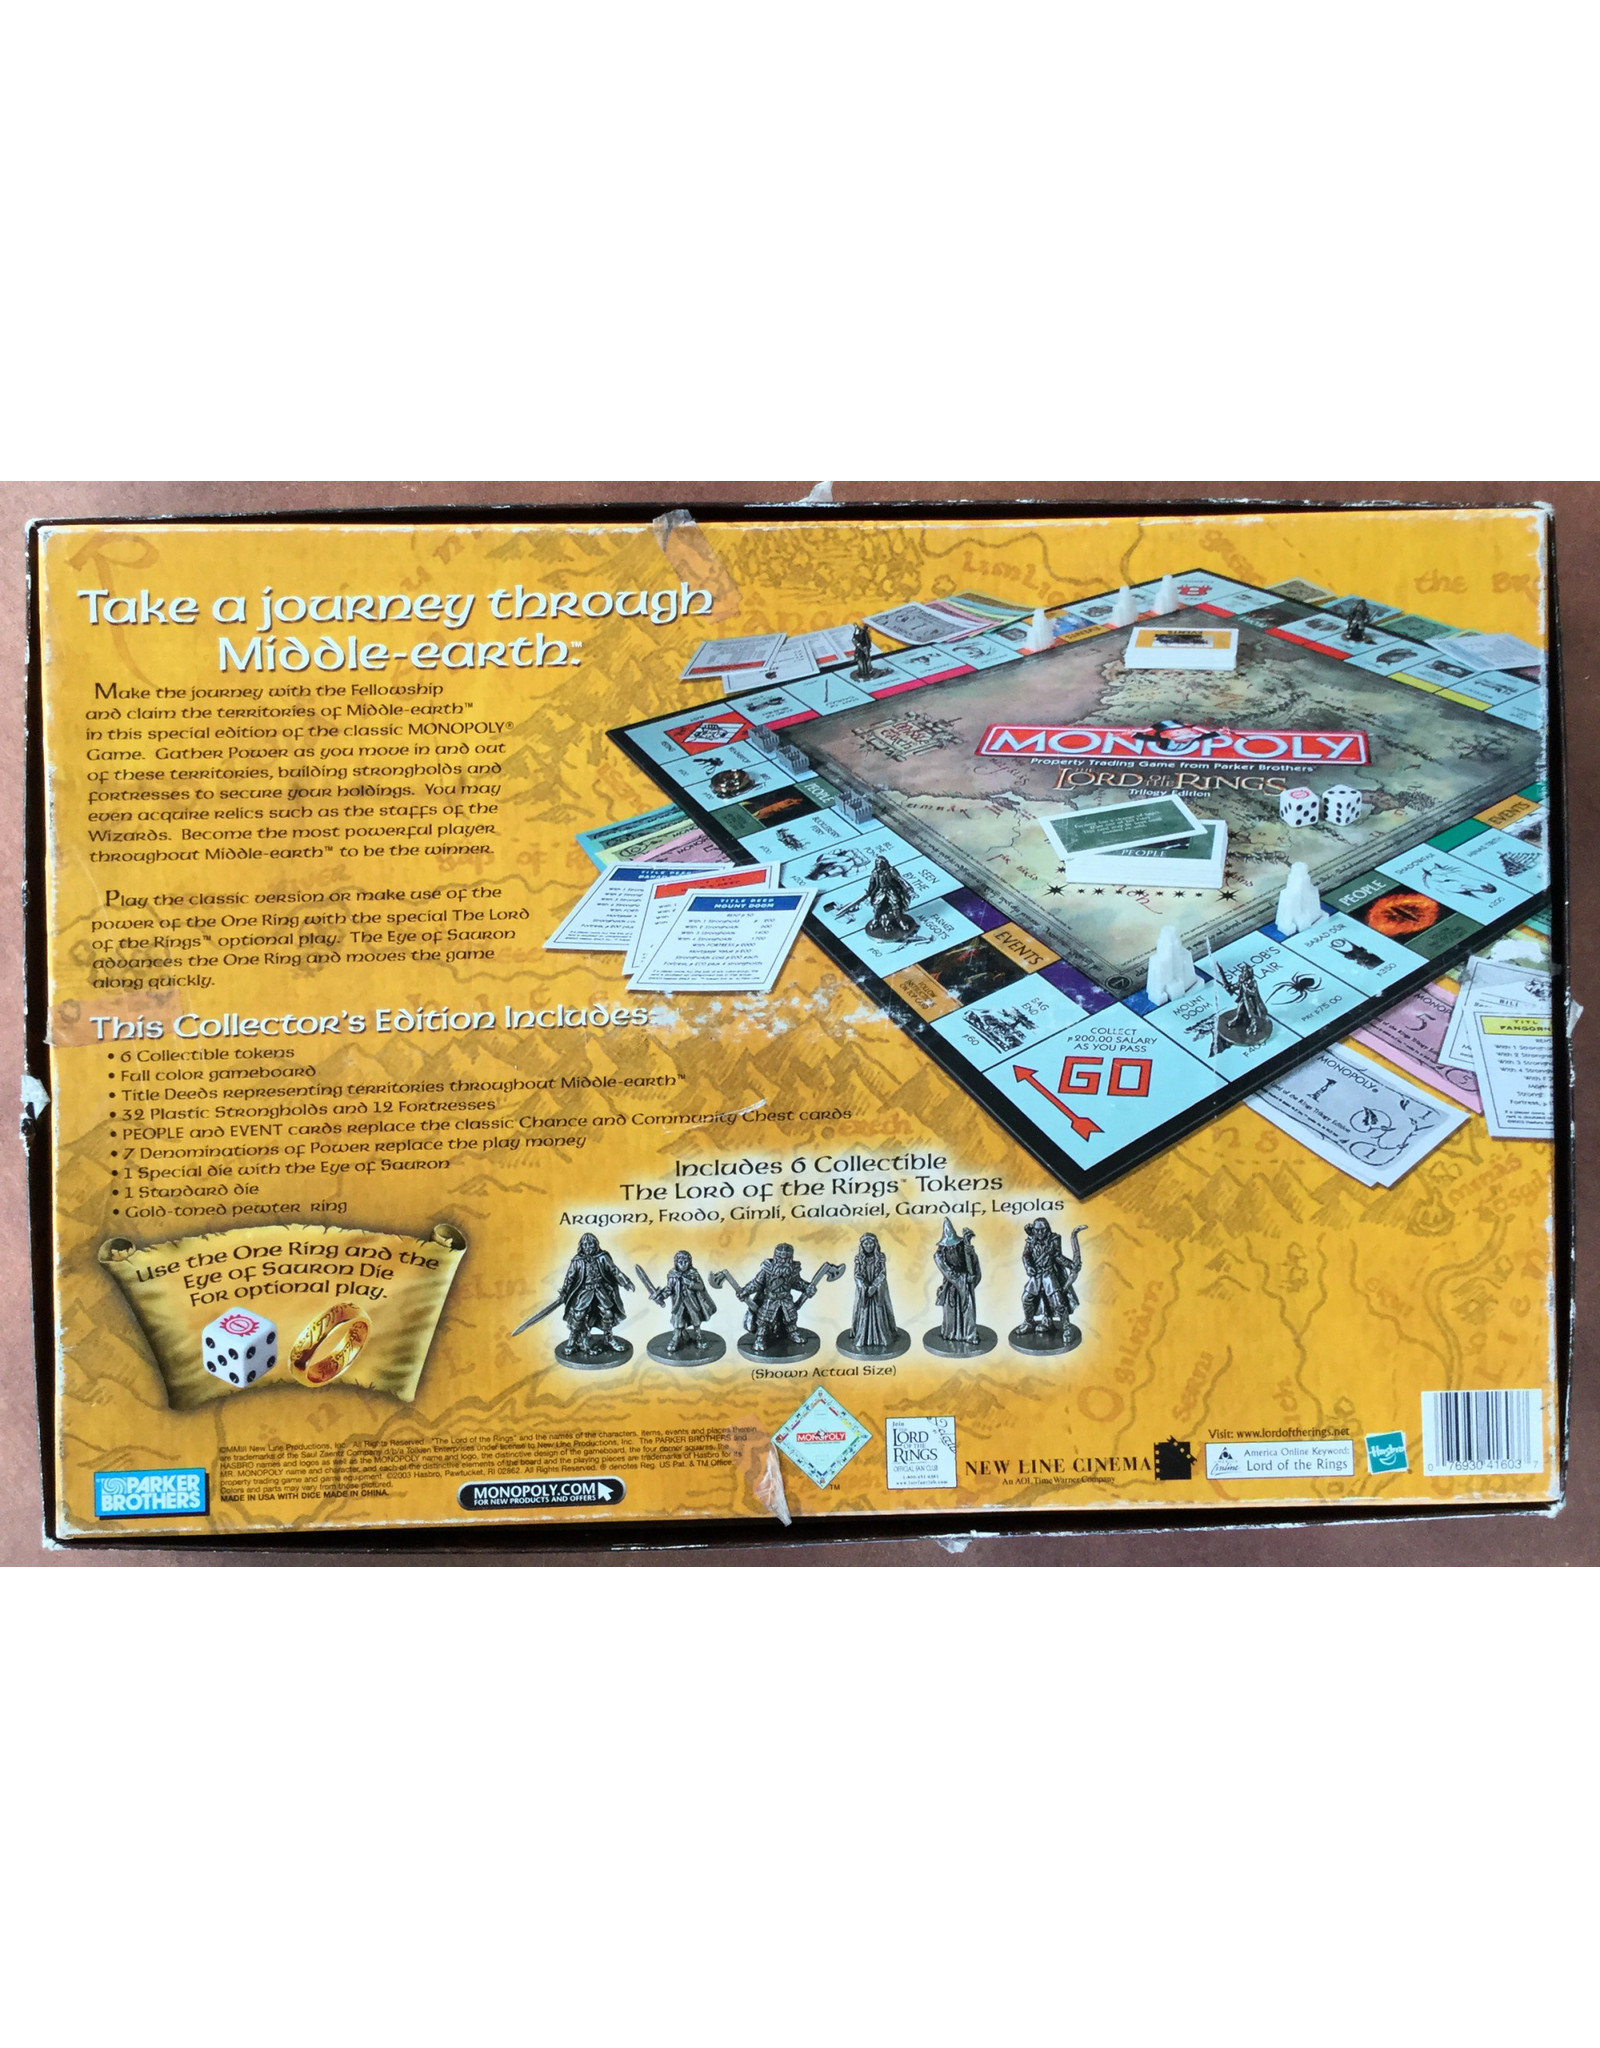 Hasbro Monopoly Lord of the Rings Trilogy Edition